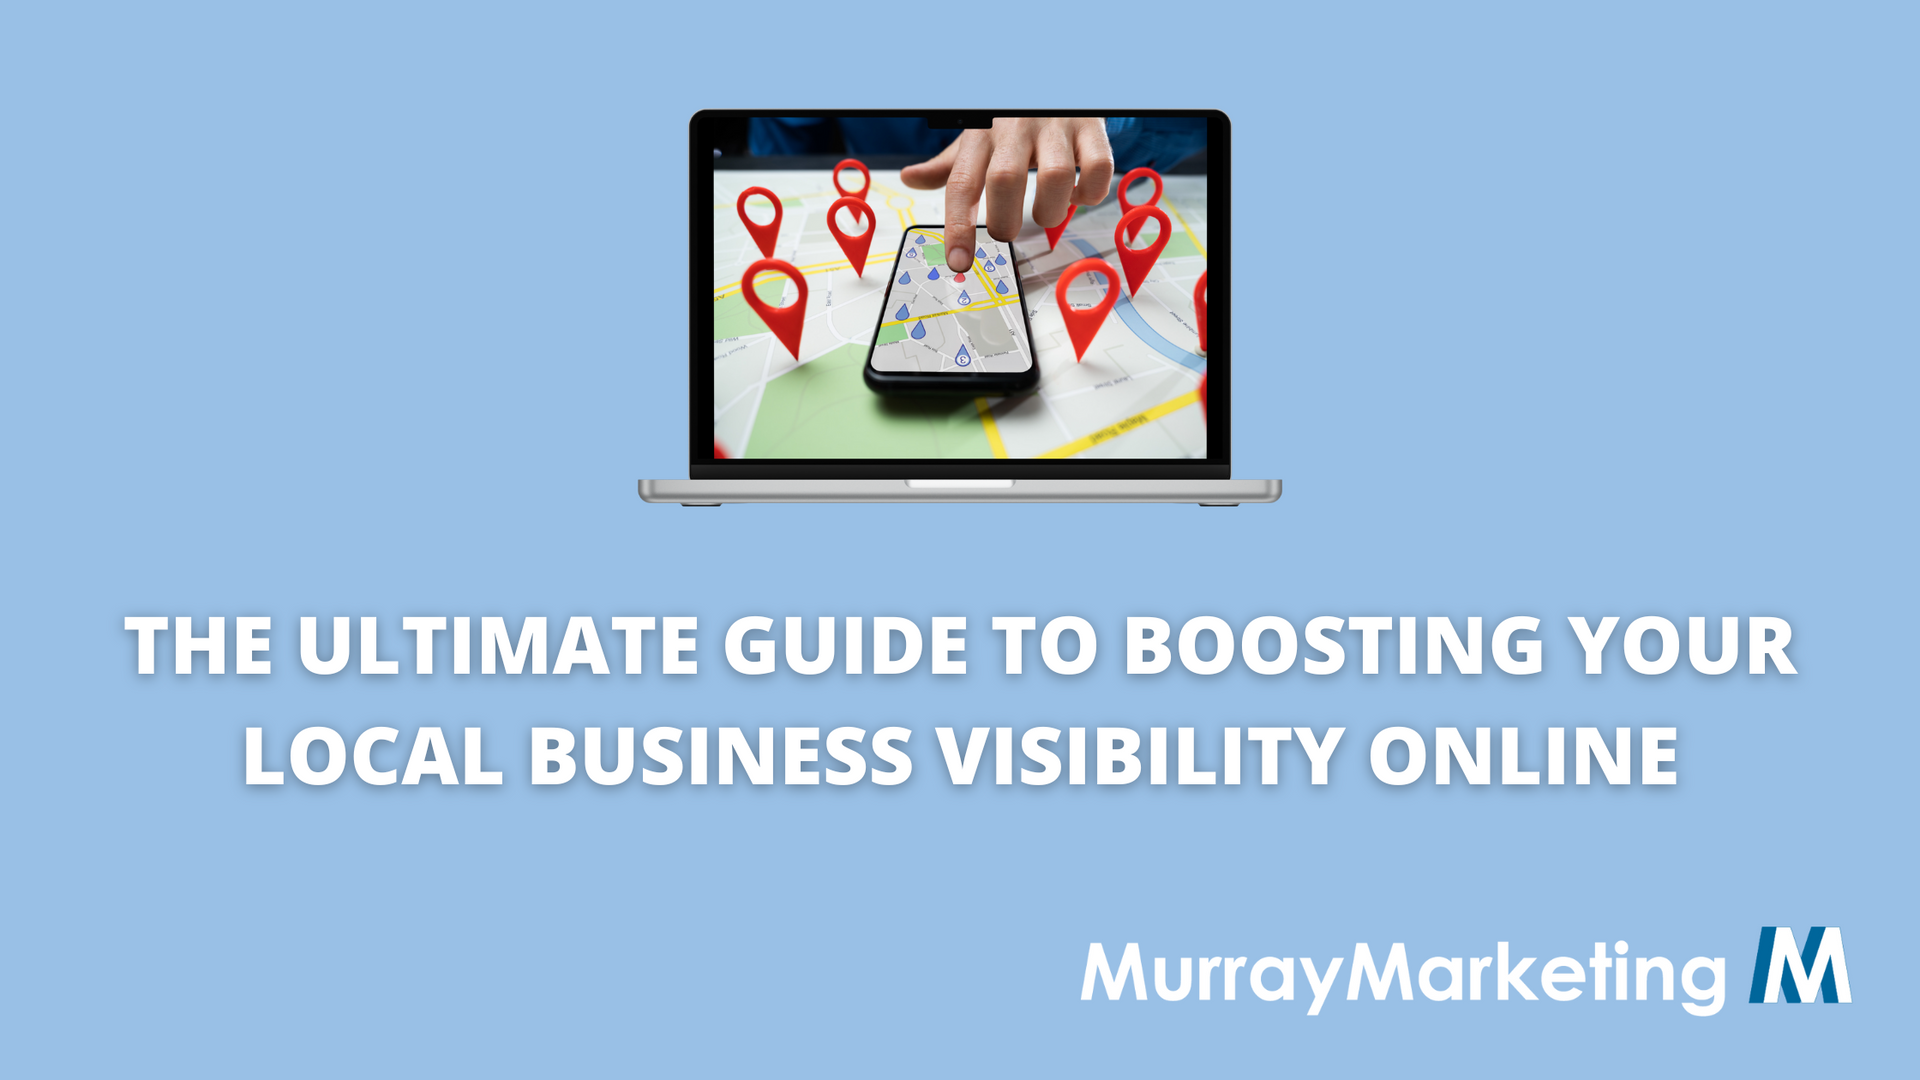 The Ultimate Guide to Boosting Your Local Business Online Murray marketing services